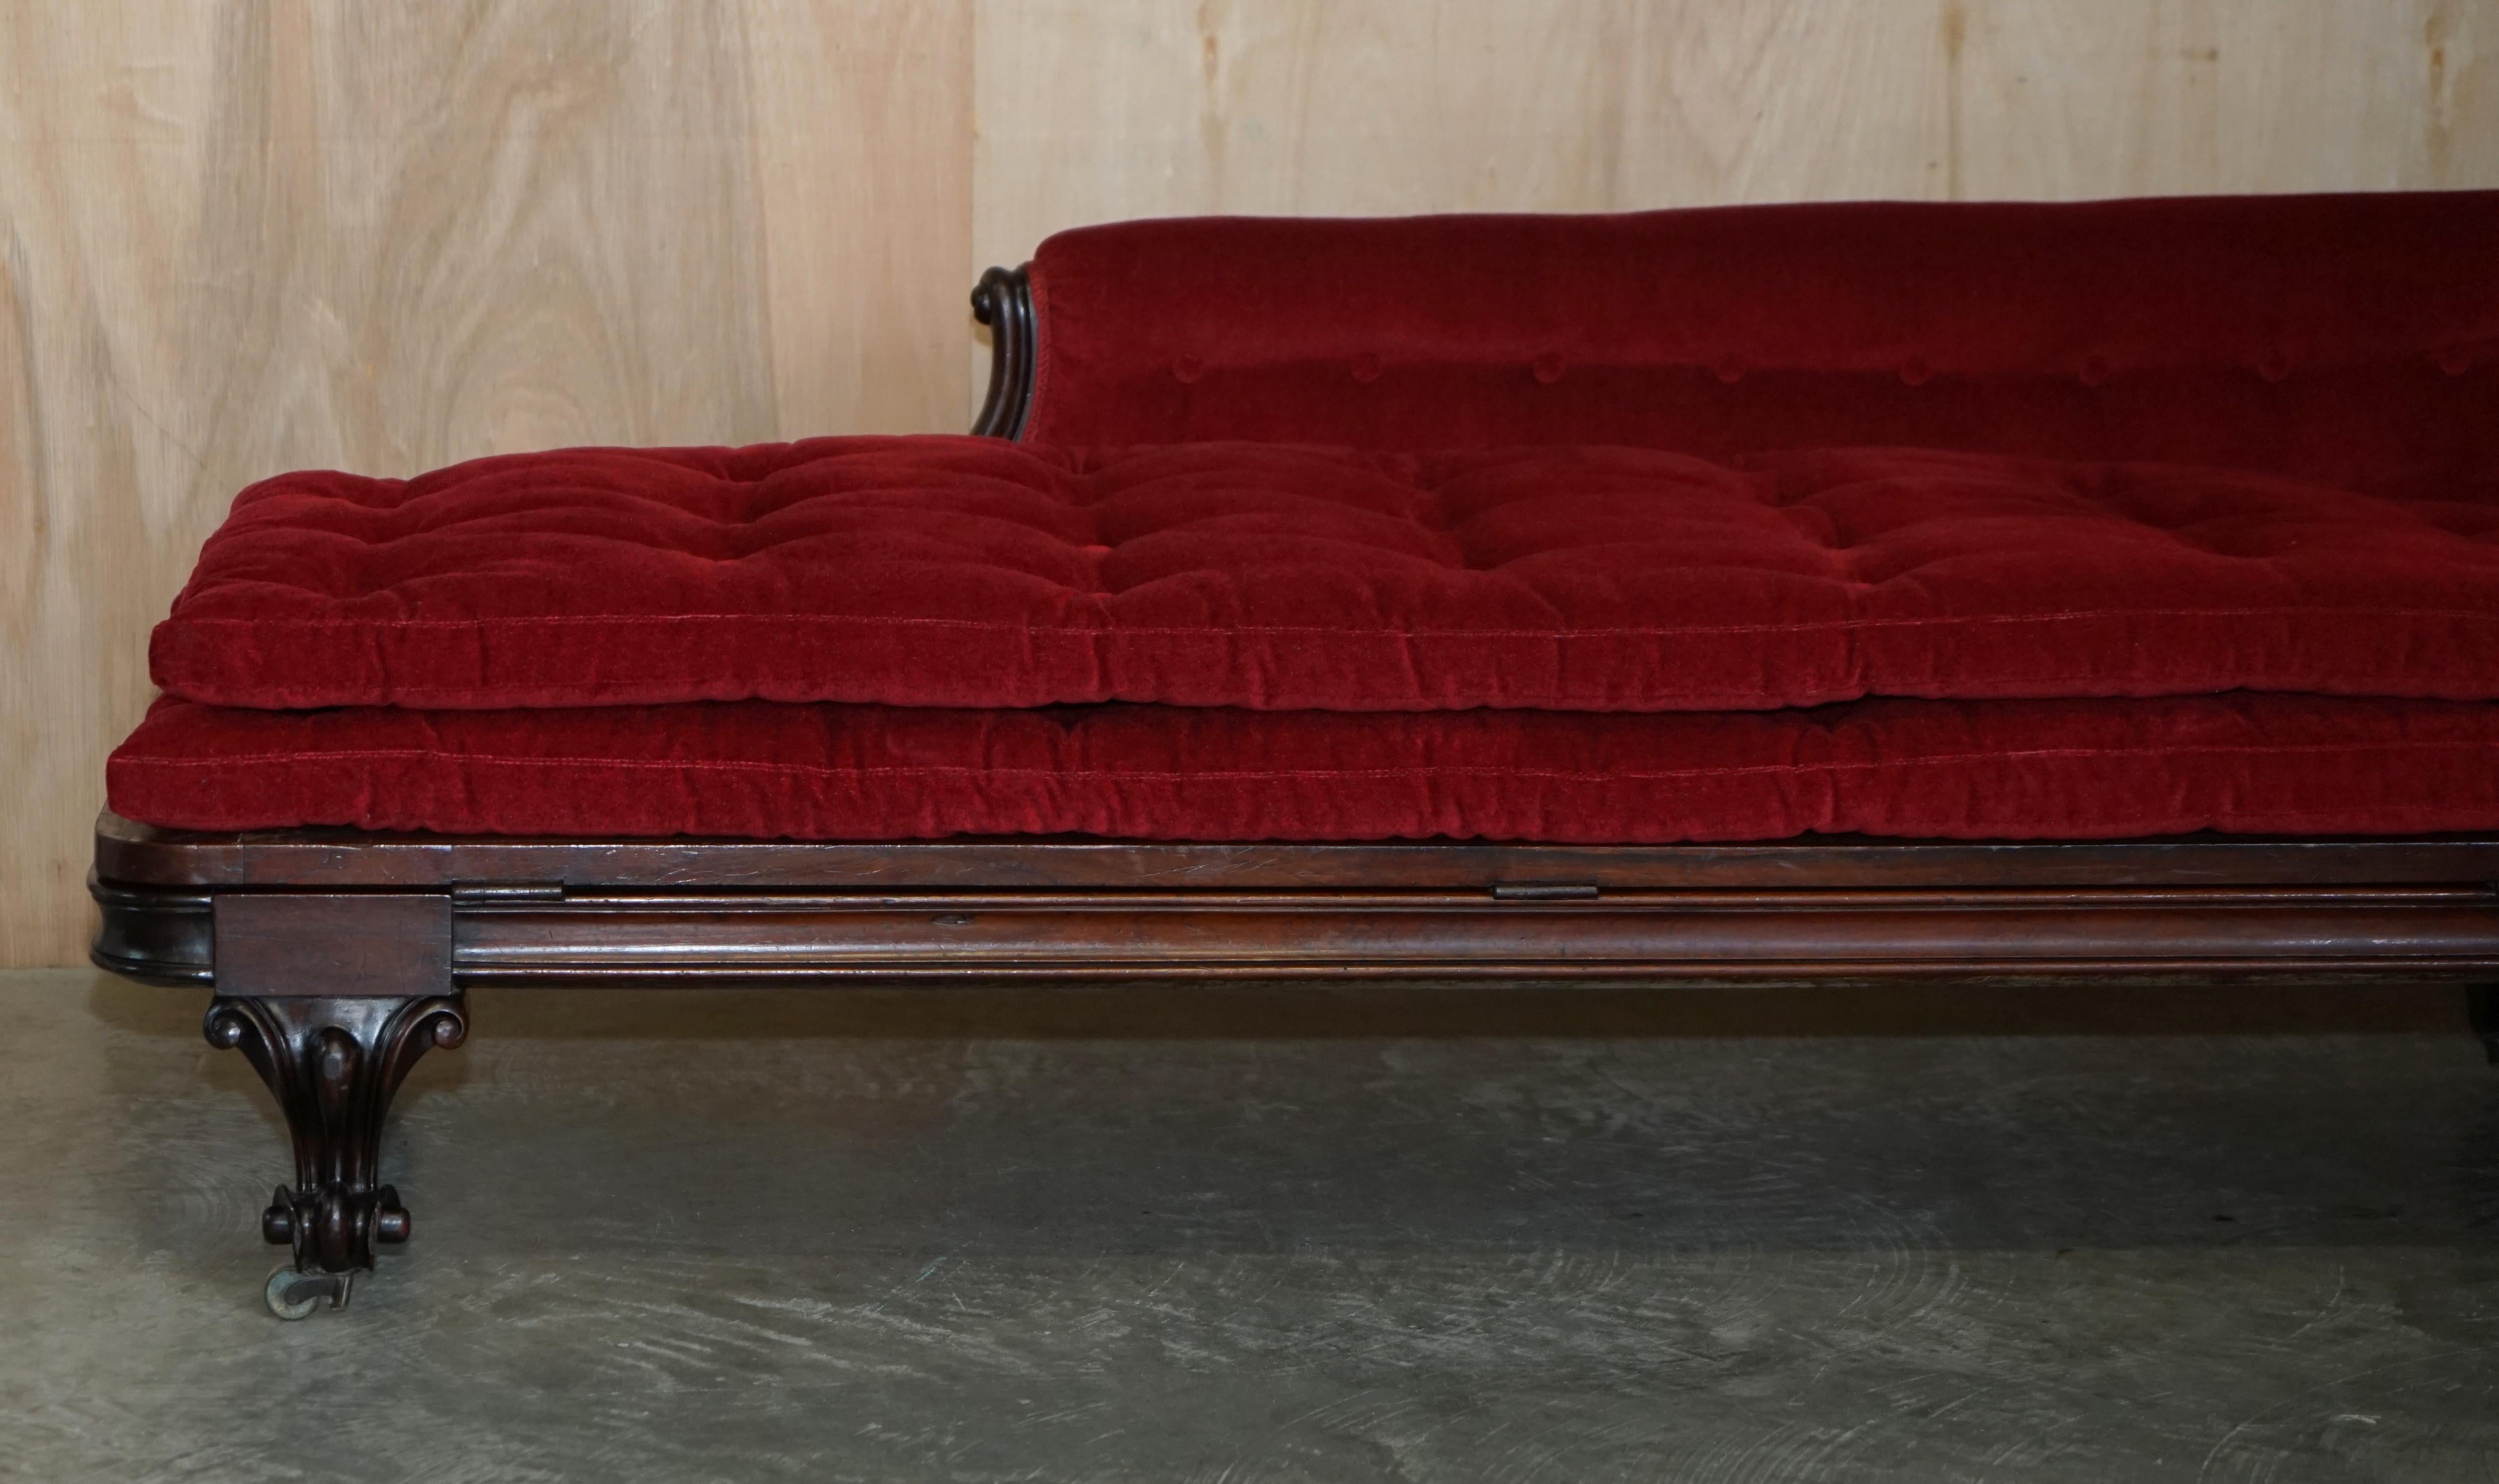 William IV Rare Antique William iv circa 1830 Hardwood Chesterfield Extending Chaise Lounge For Sale